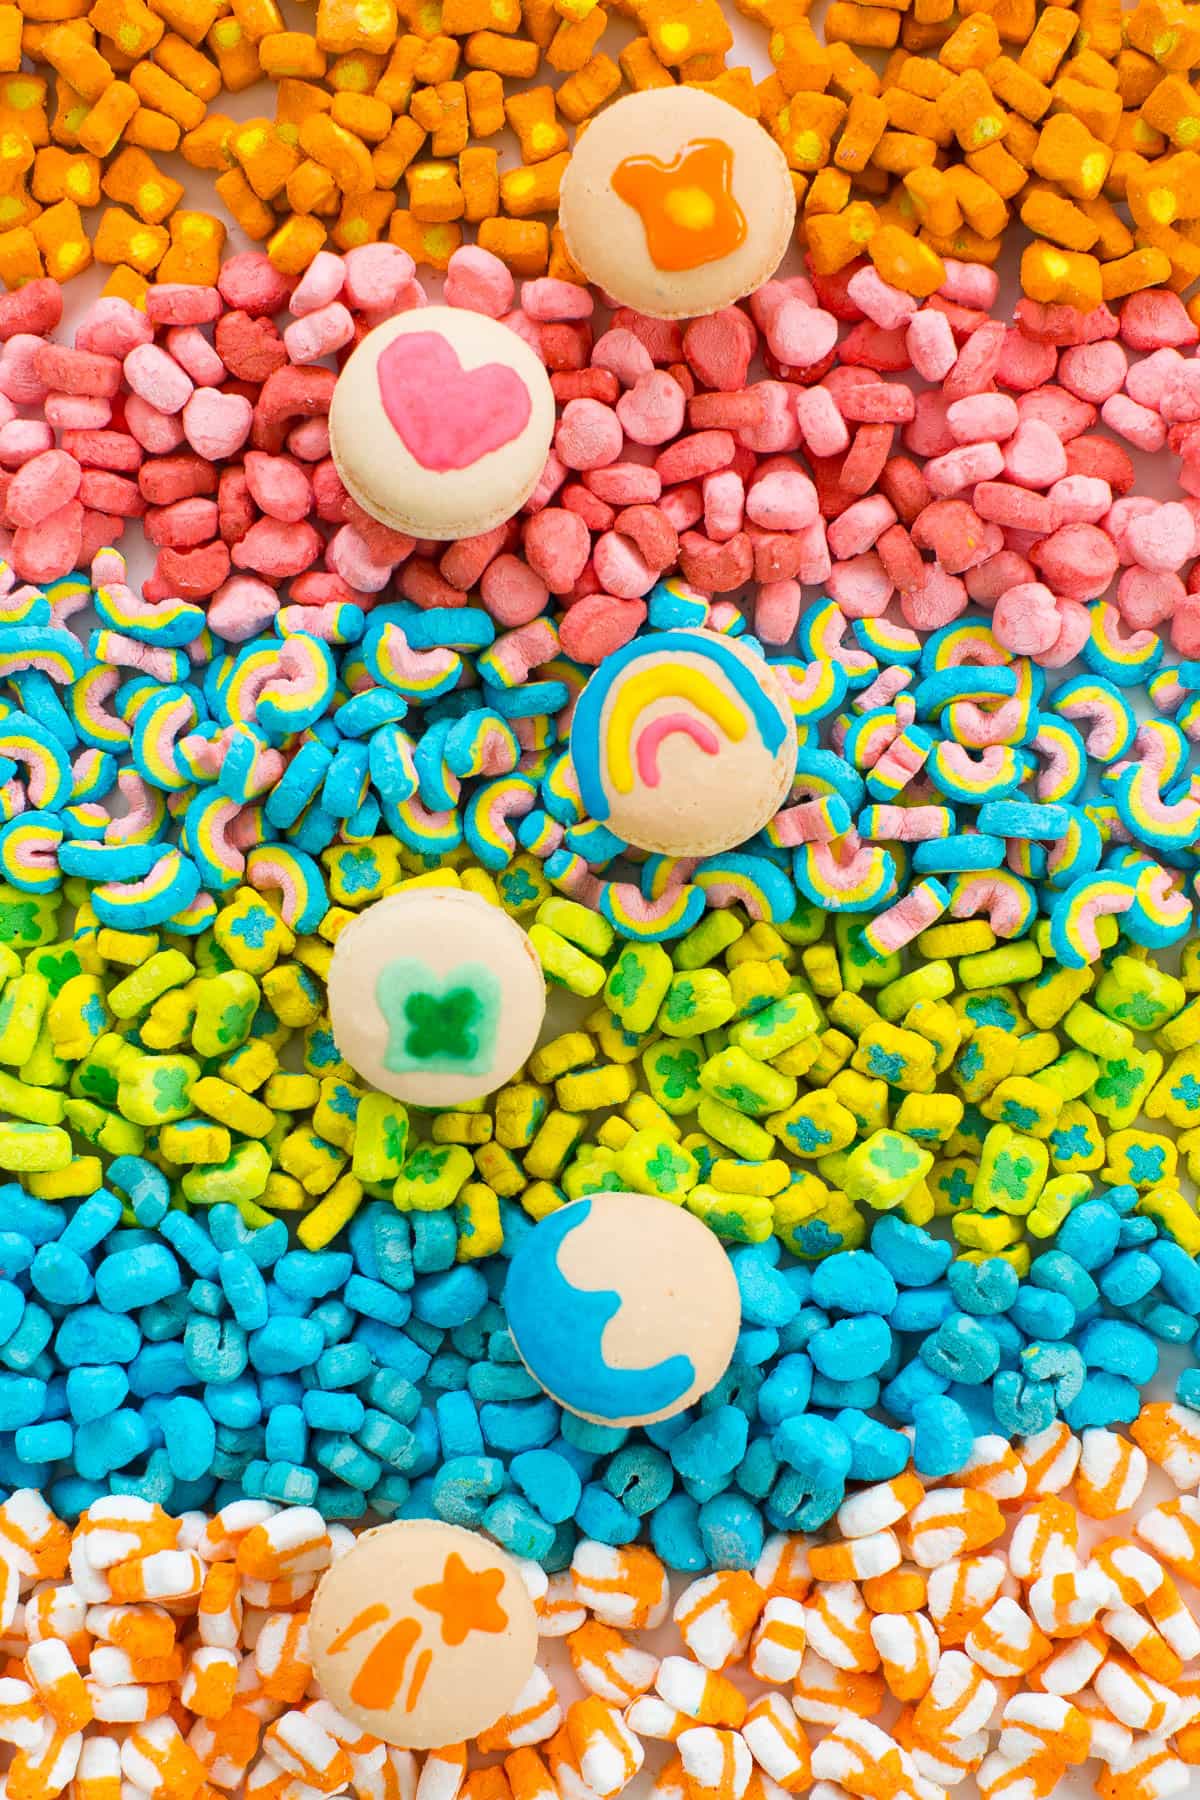 DIY lucky charms macarons by top Houston lifestyle blogger, Ashley Rose of Sugar and Cloth